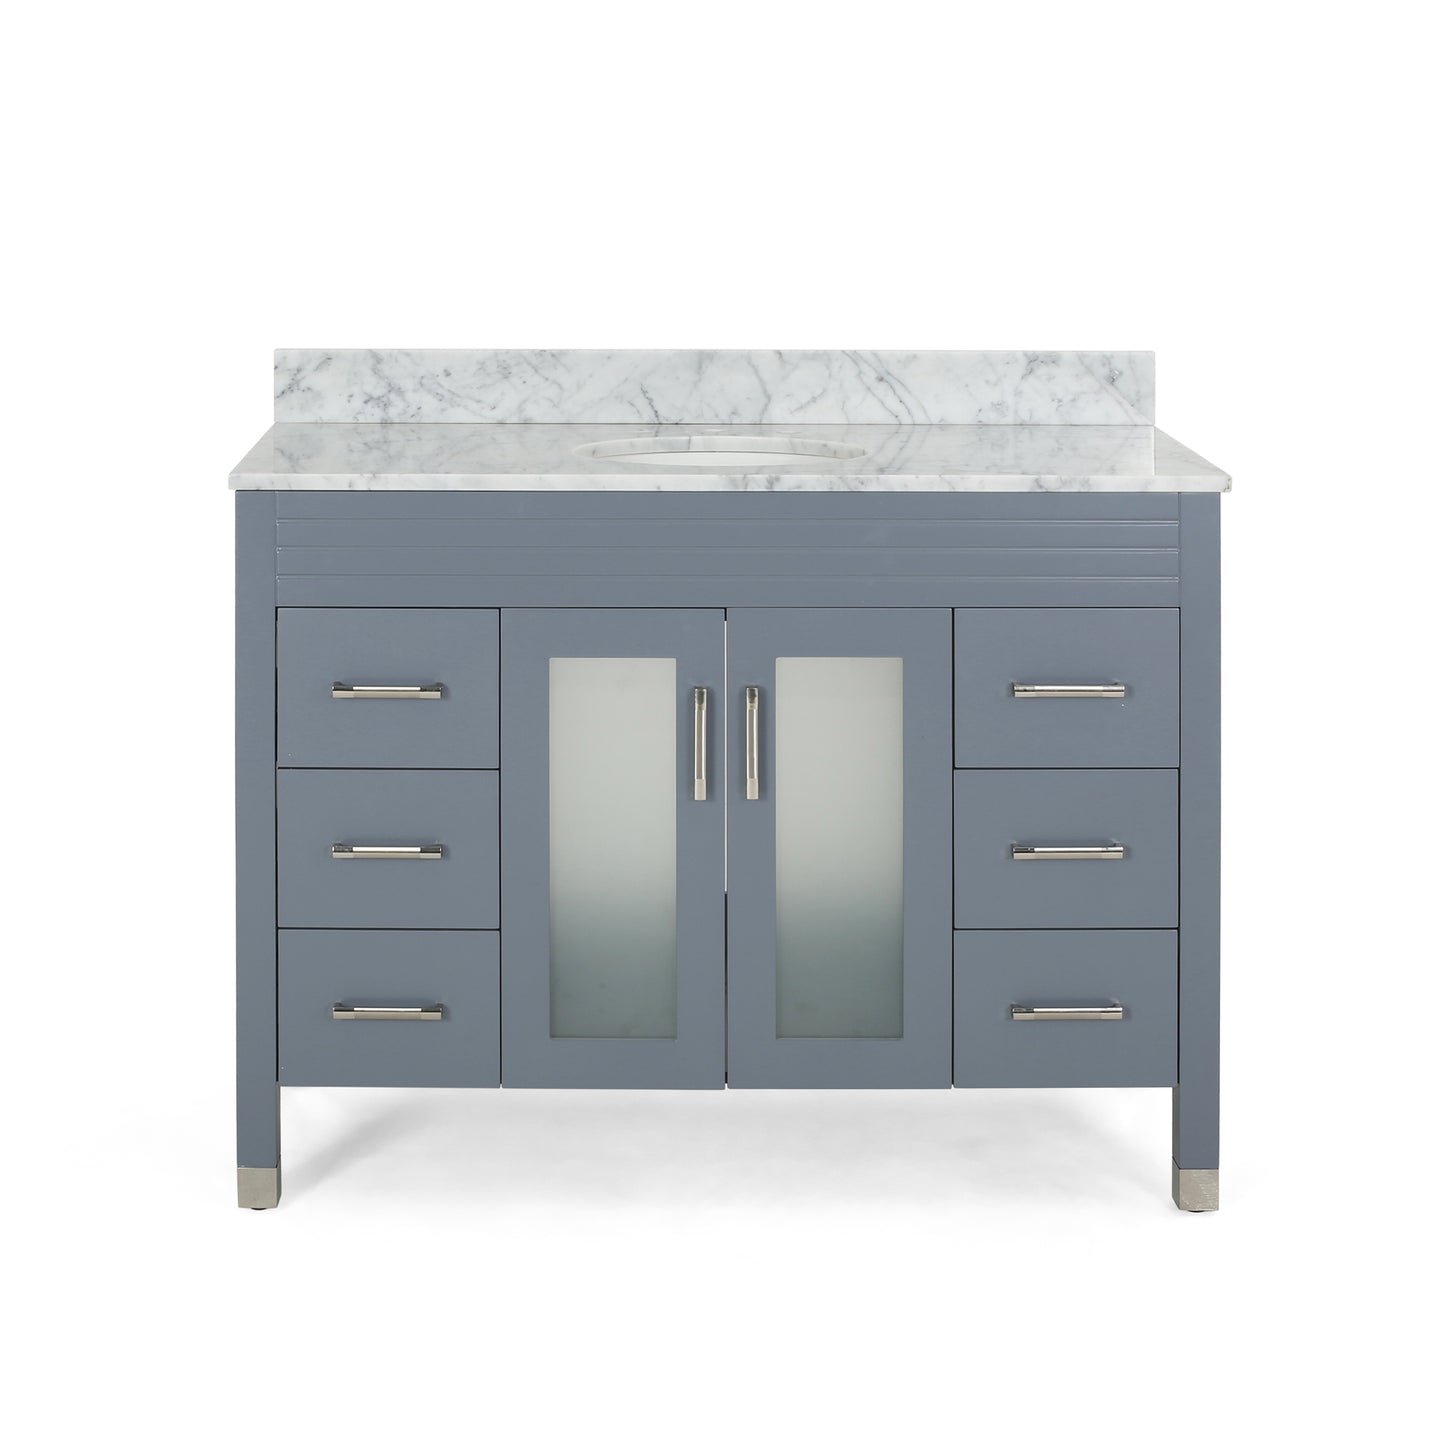 Holdame Contemporary 48" Wood Bathroom Vanity (Counter Top Not Included)